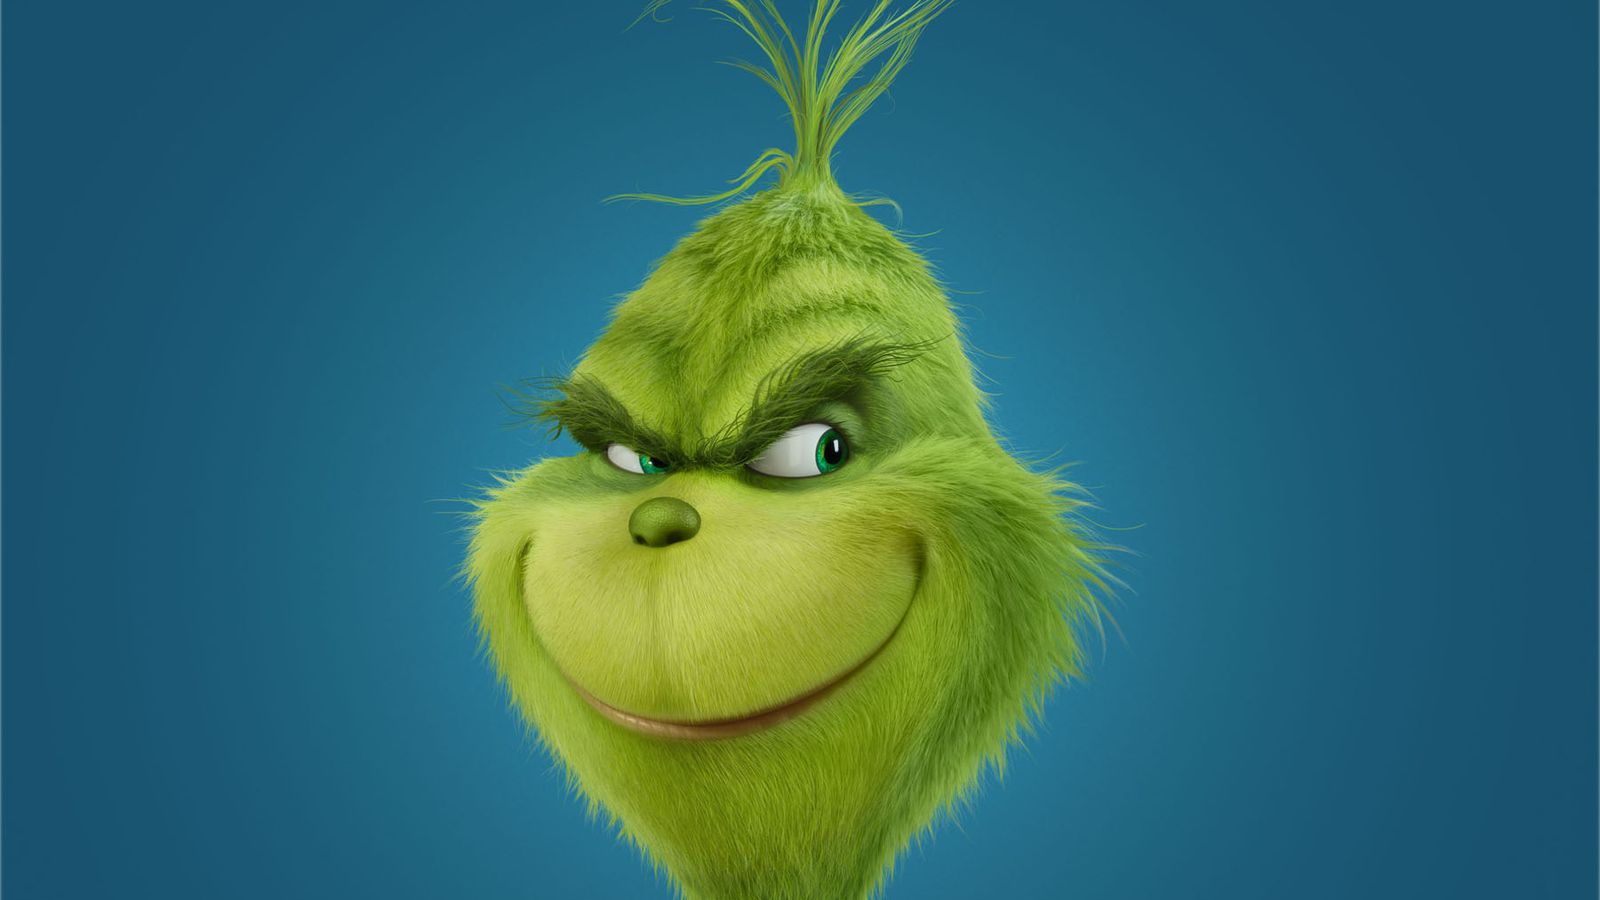 Benedict Cumberbatch Is Going To Voice The Grinch